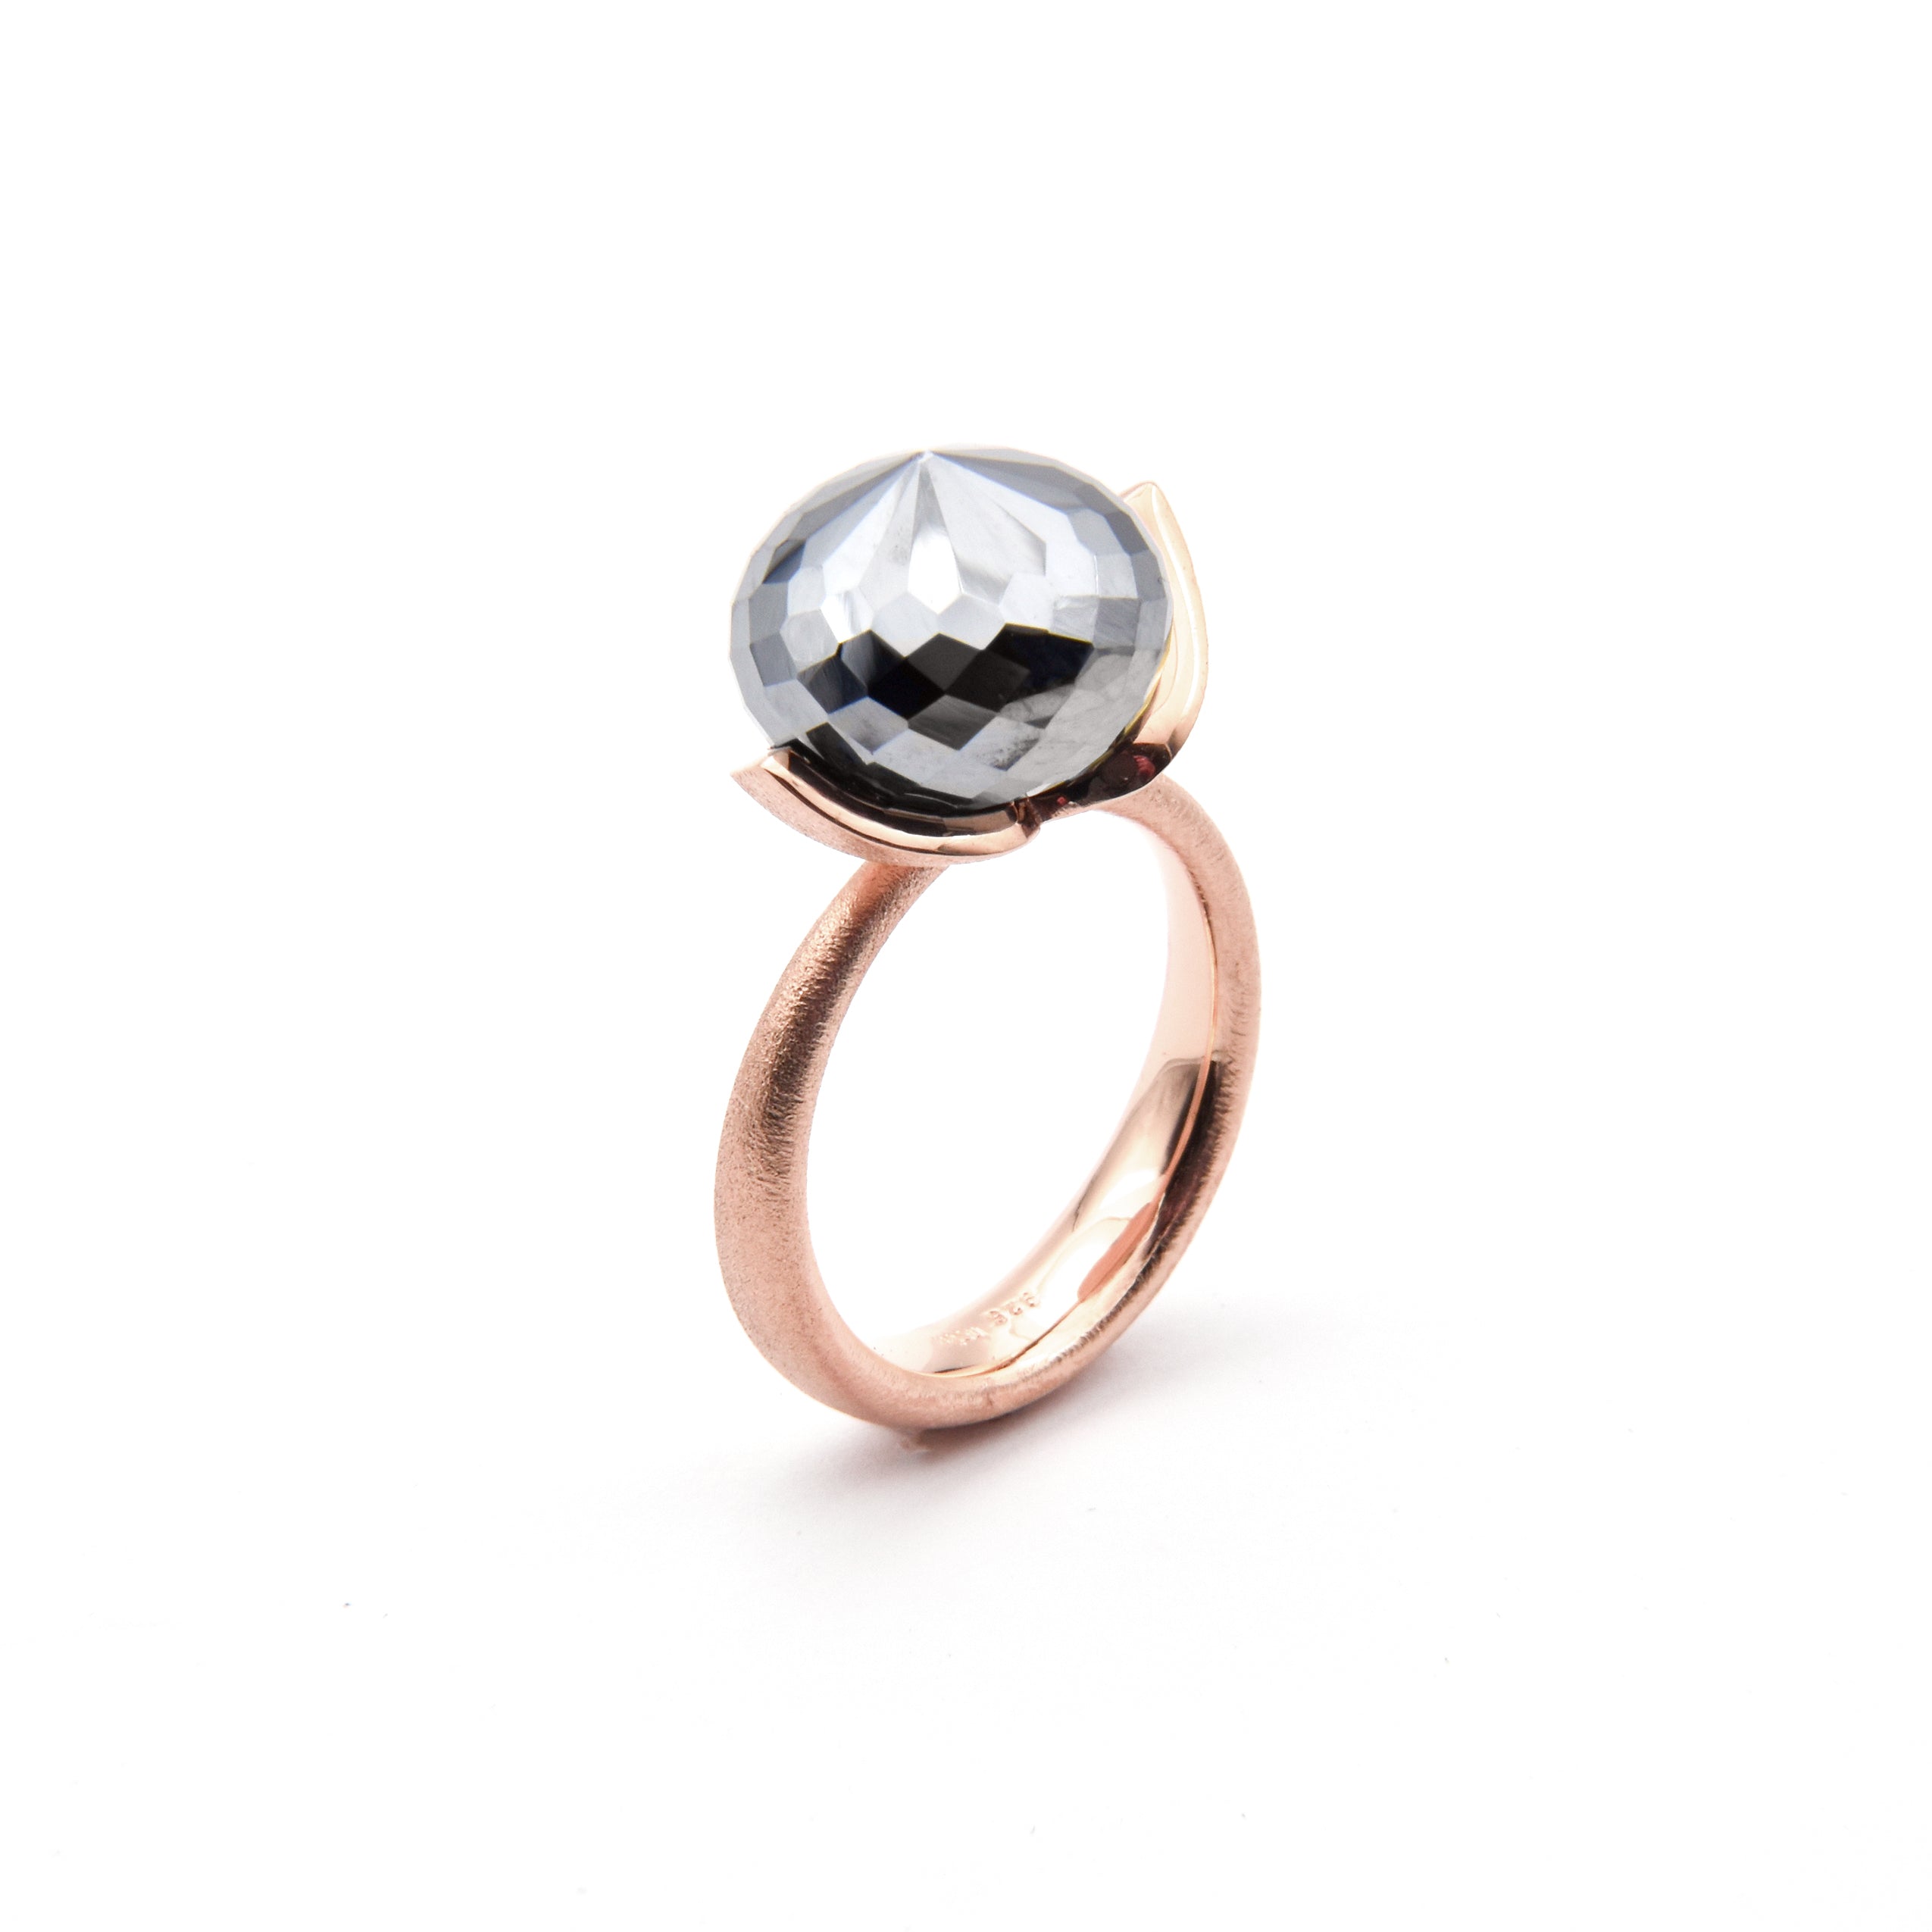 Dolce ring "big" with hematite rec. 925/-